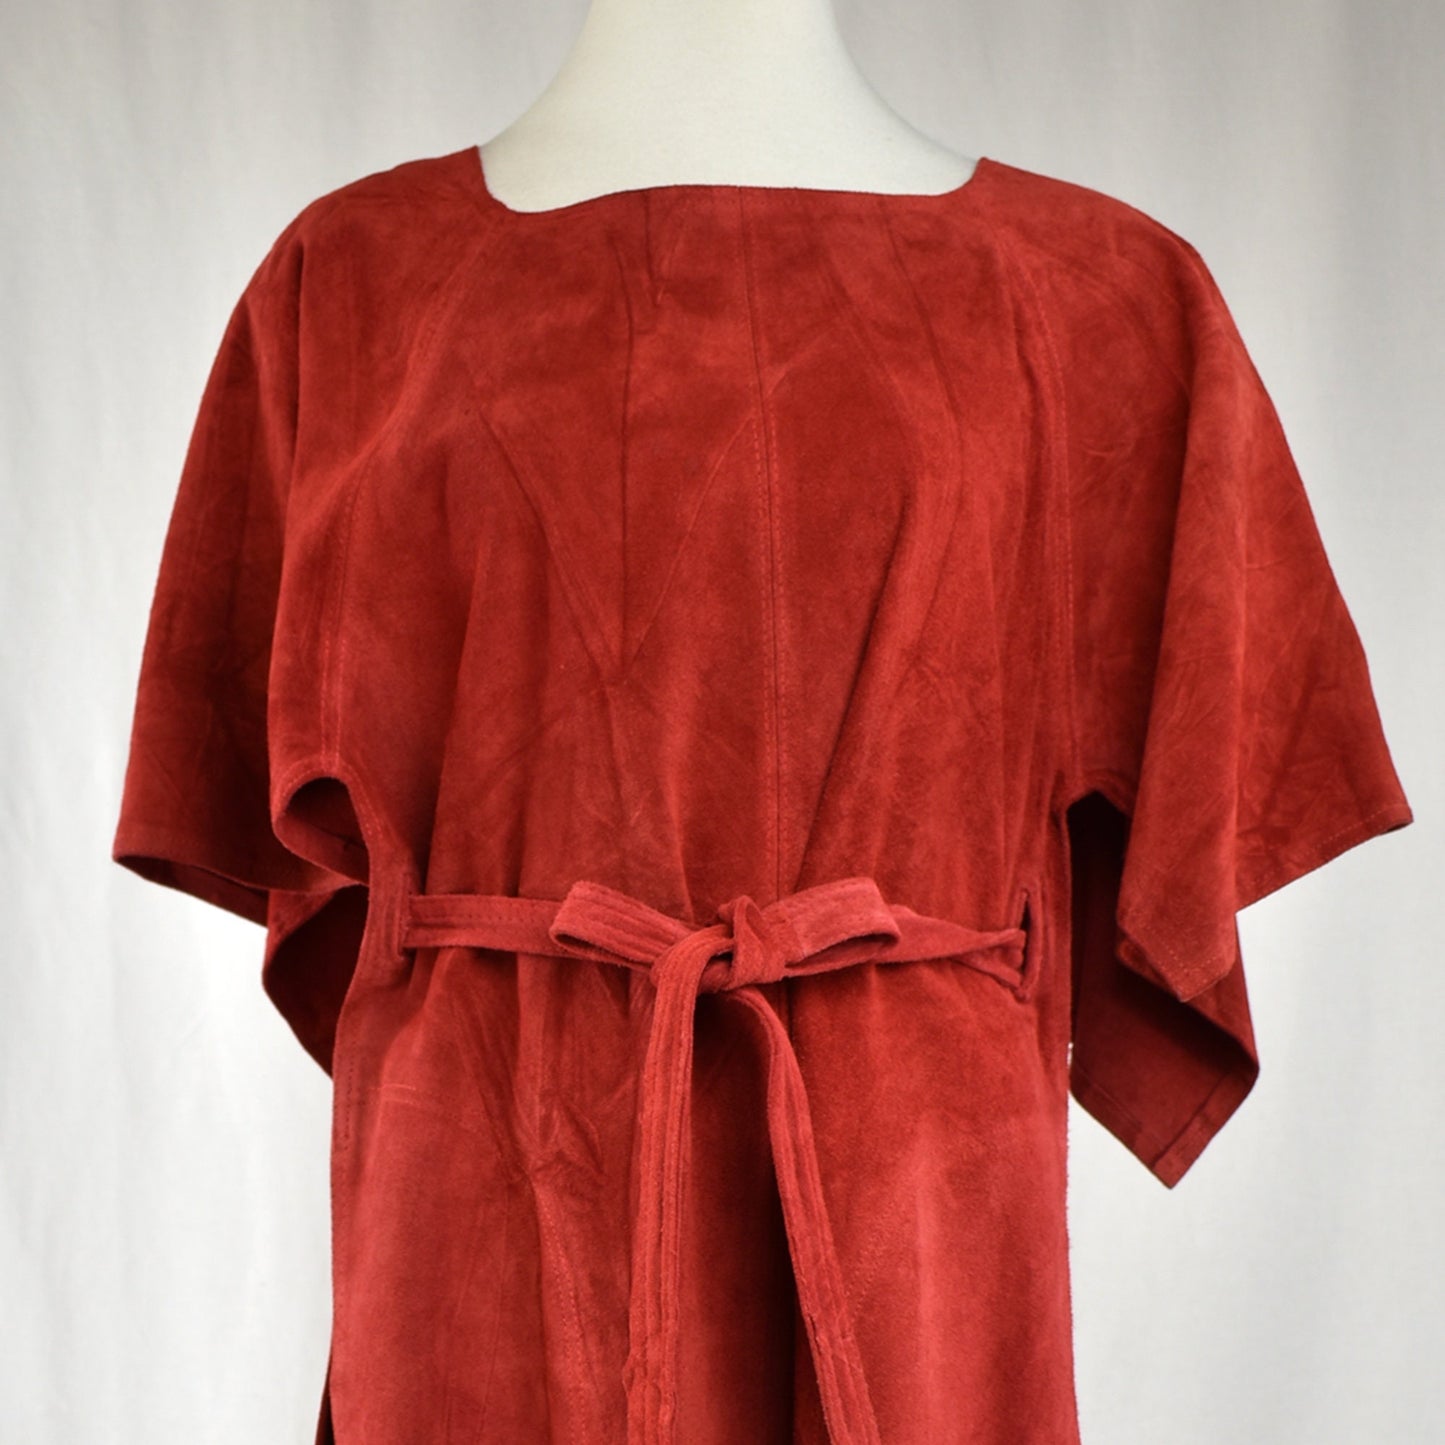 Vintage Incredible 70s Suede Wrap Dress Seventies Leather Apron Dress